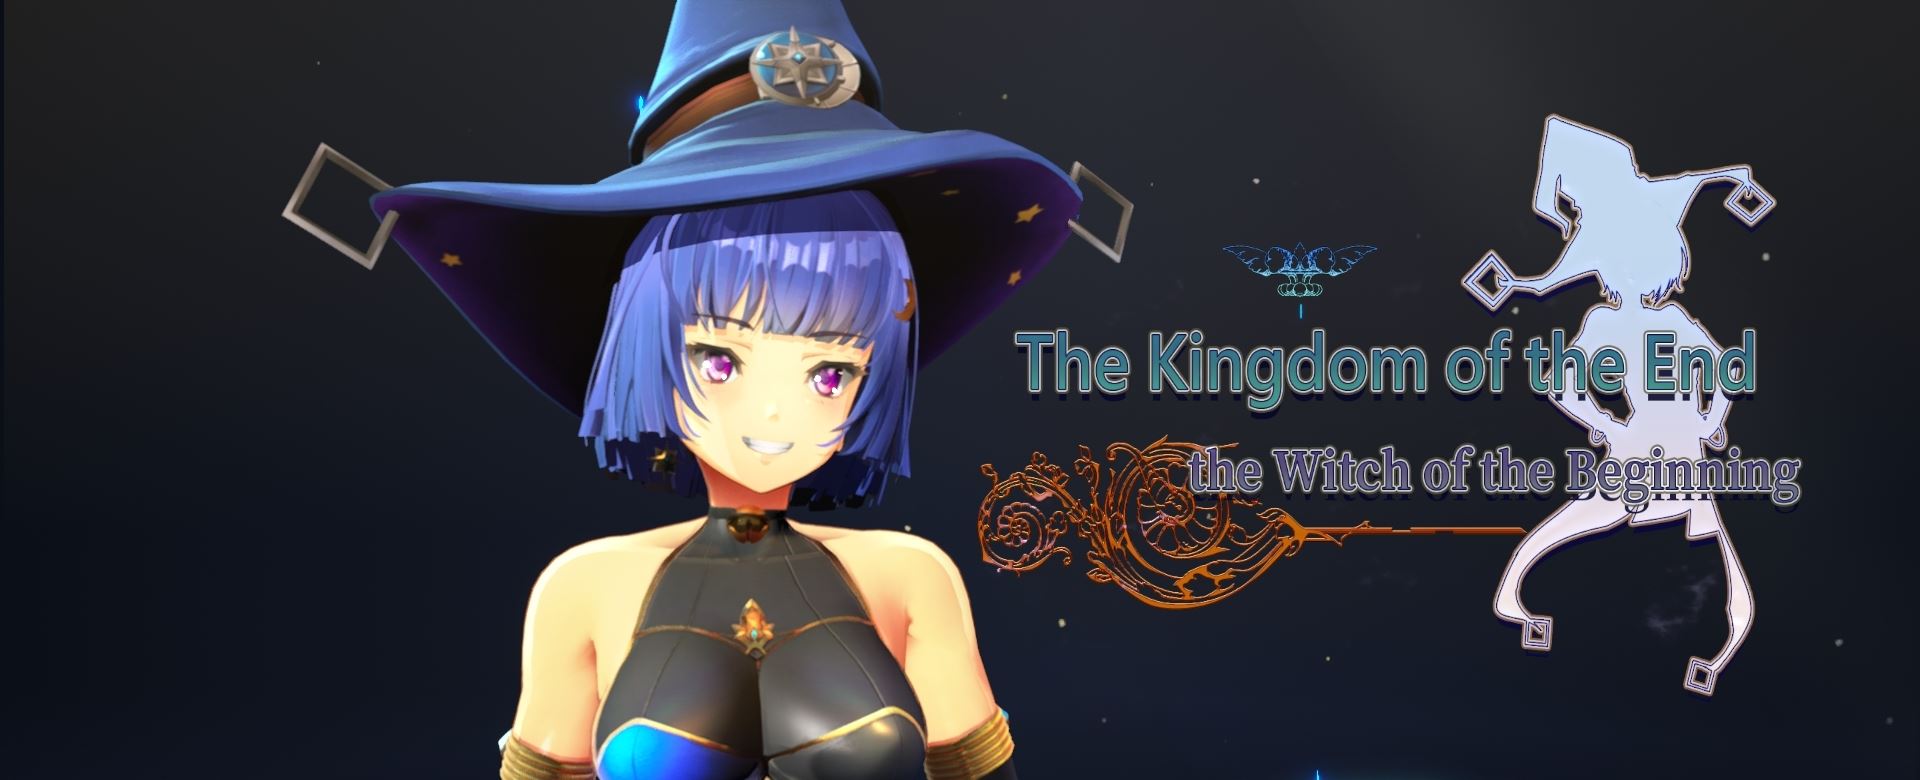 The Kingdom of the End＆The Witch of the Beginning porn xxx game download cover